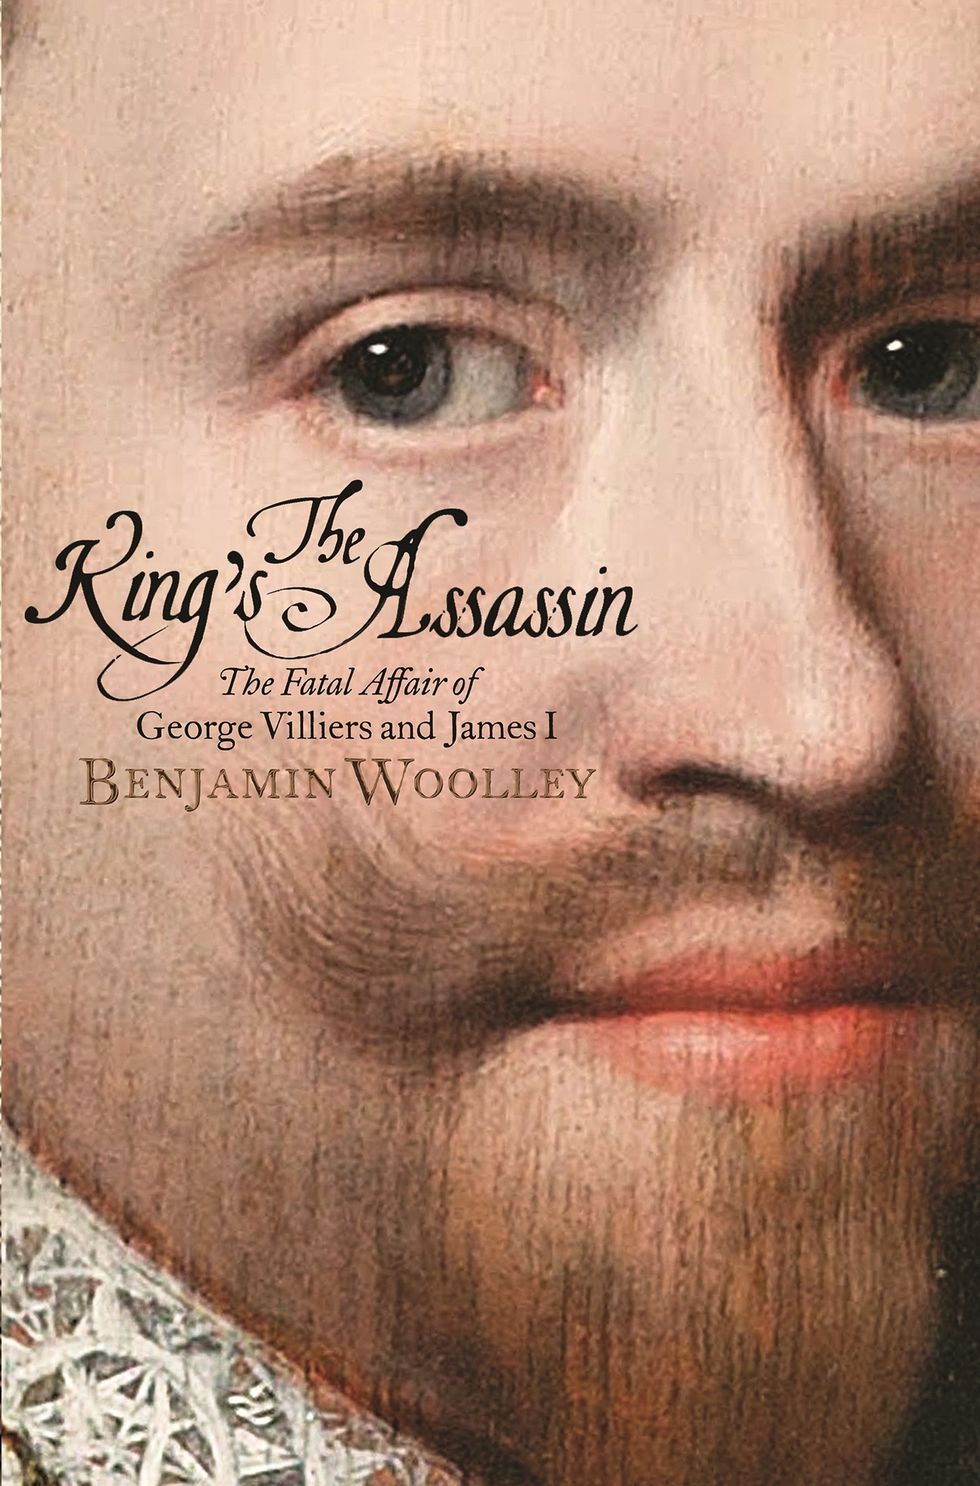 The King’s Assassin: The Fatal Affair of George Villiers and James I